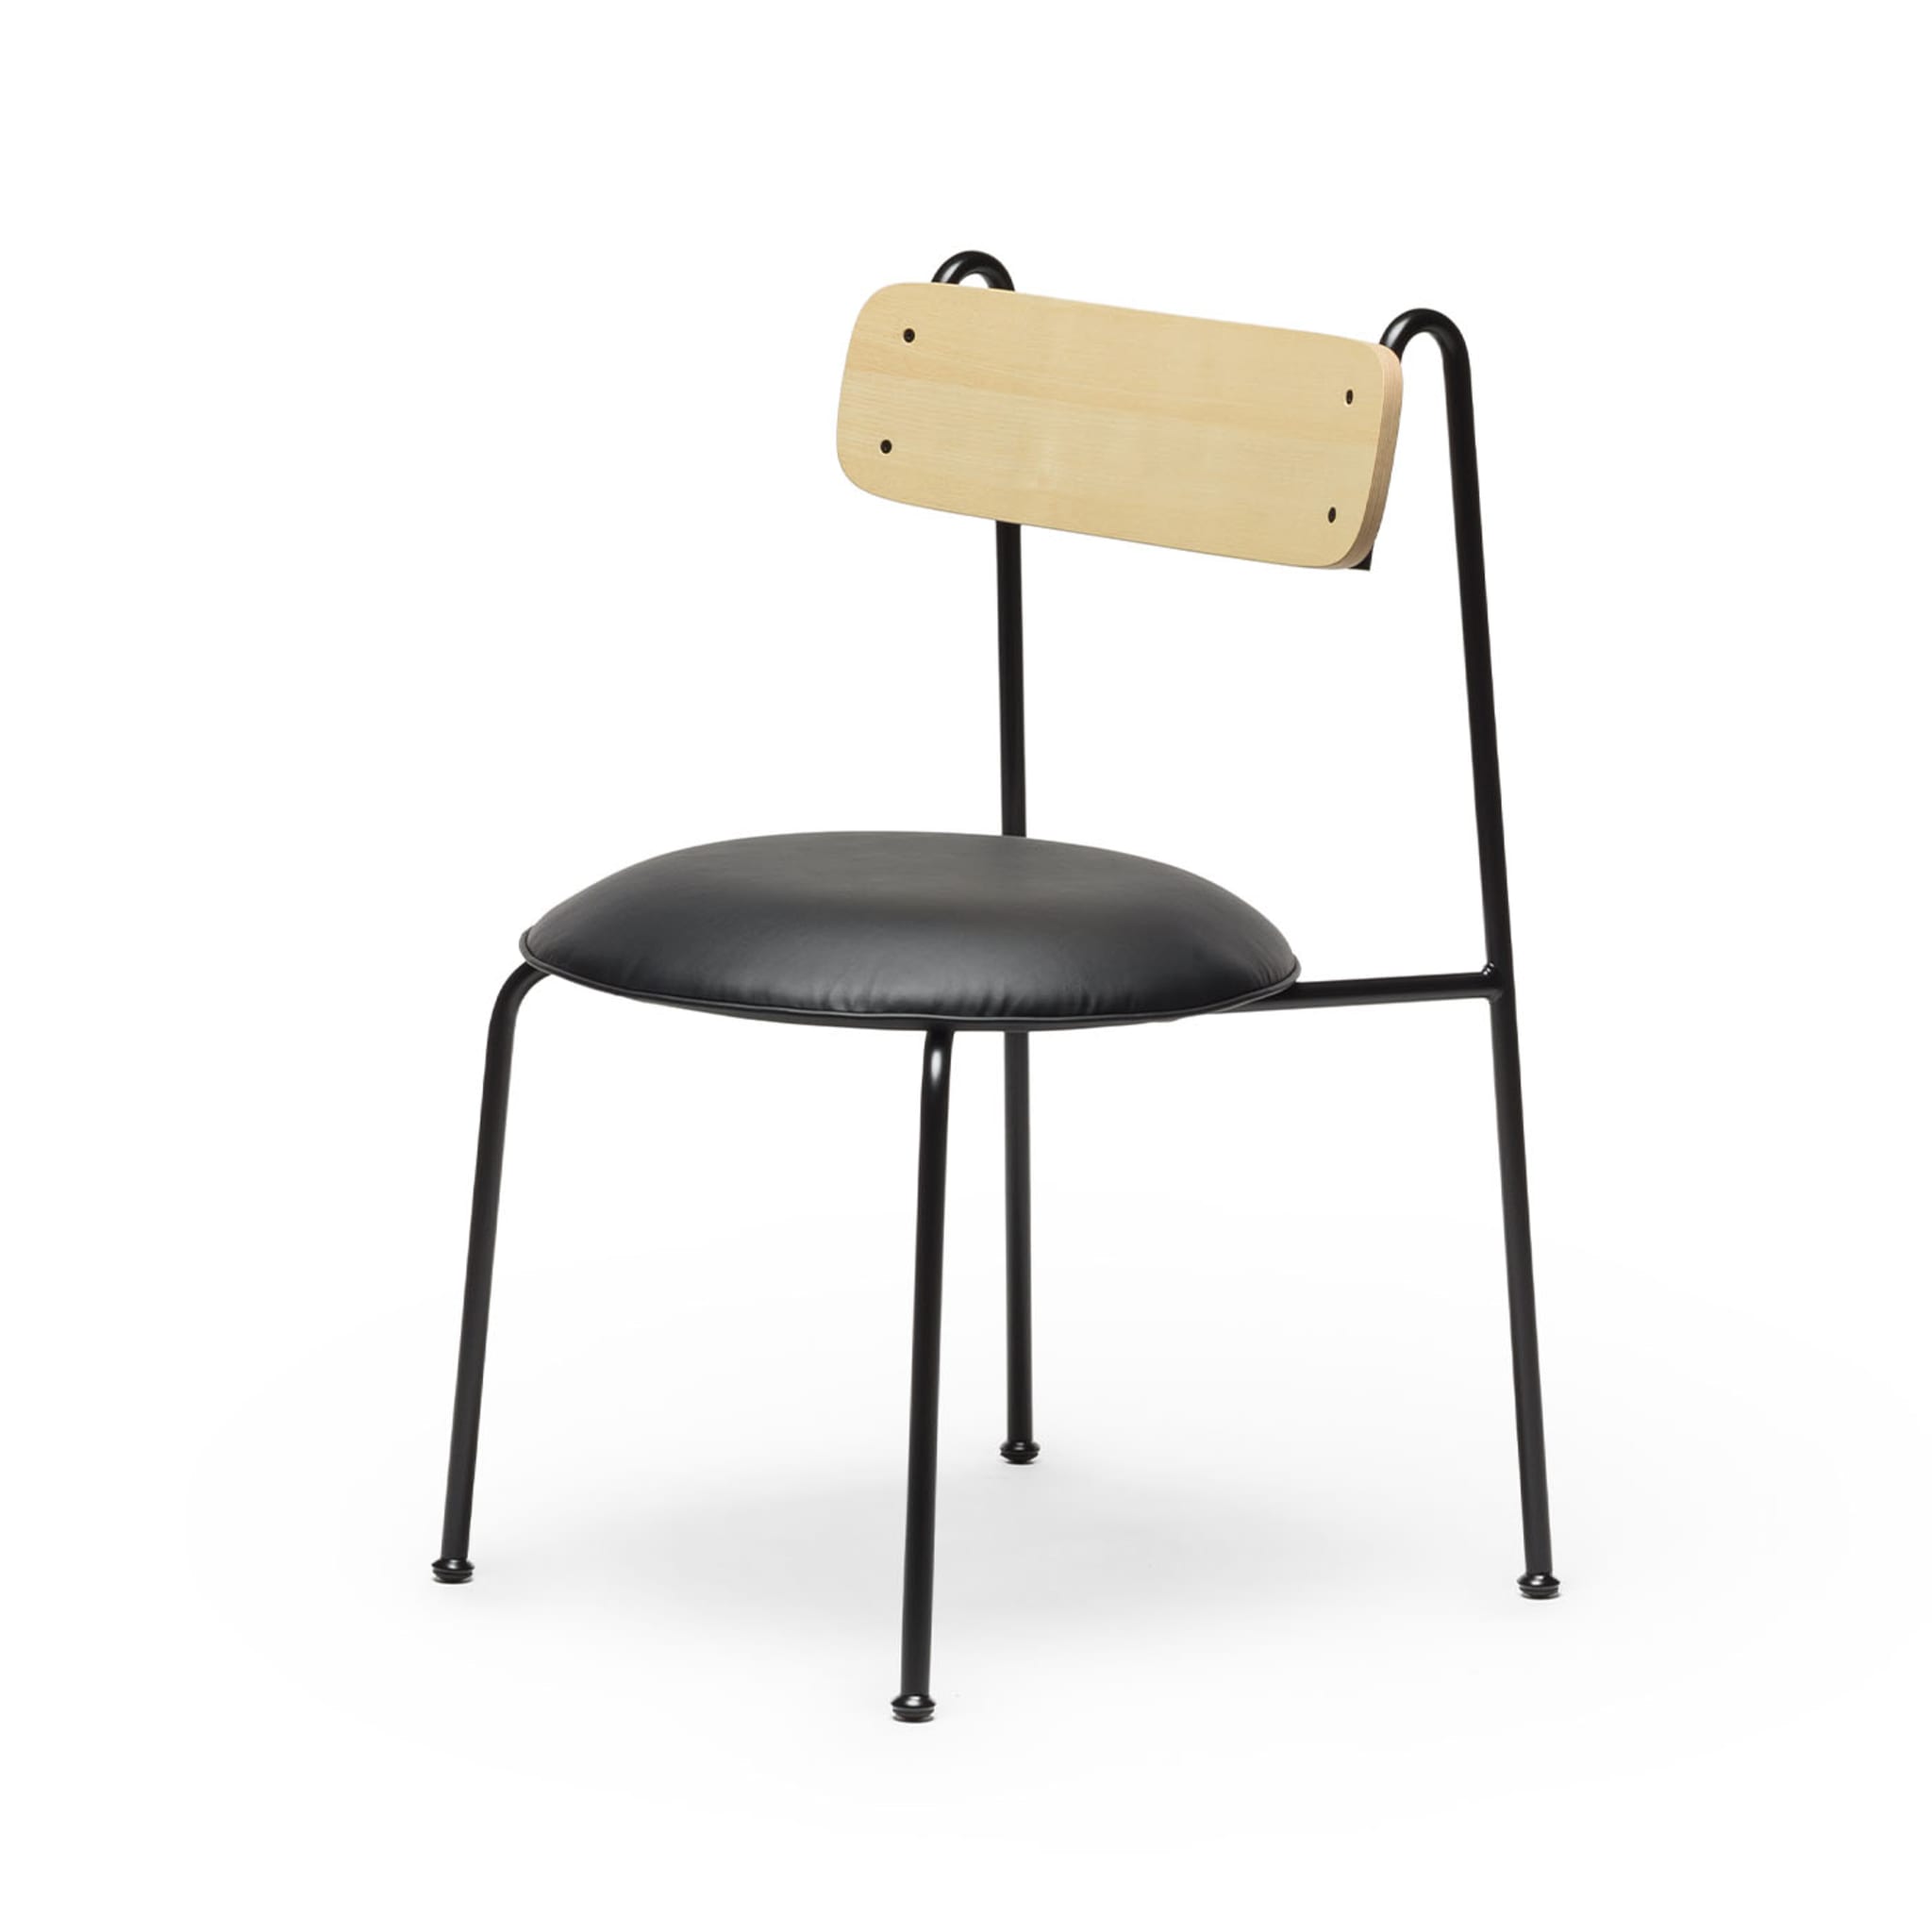 Lena S Black And Natural Ash Chair By Designerd - Alternative view 2